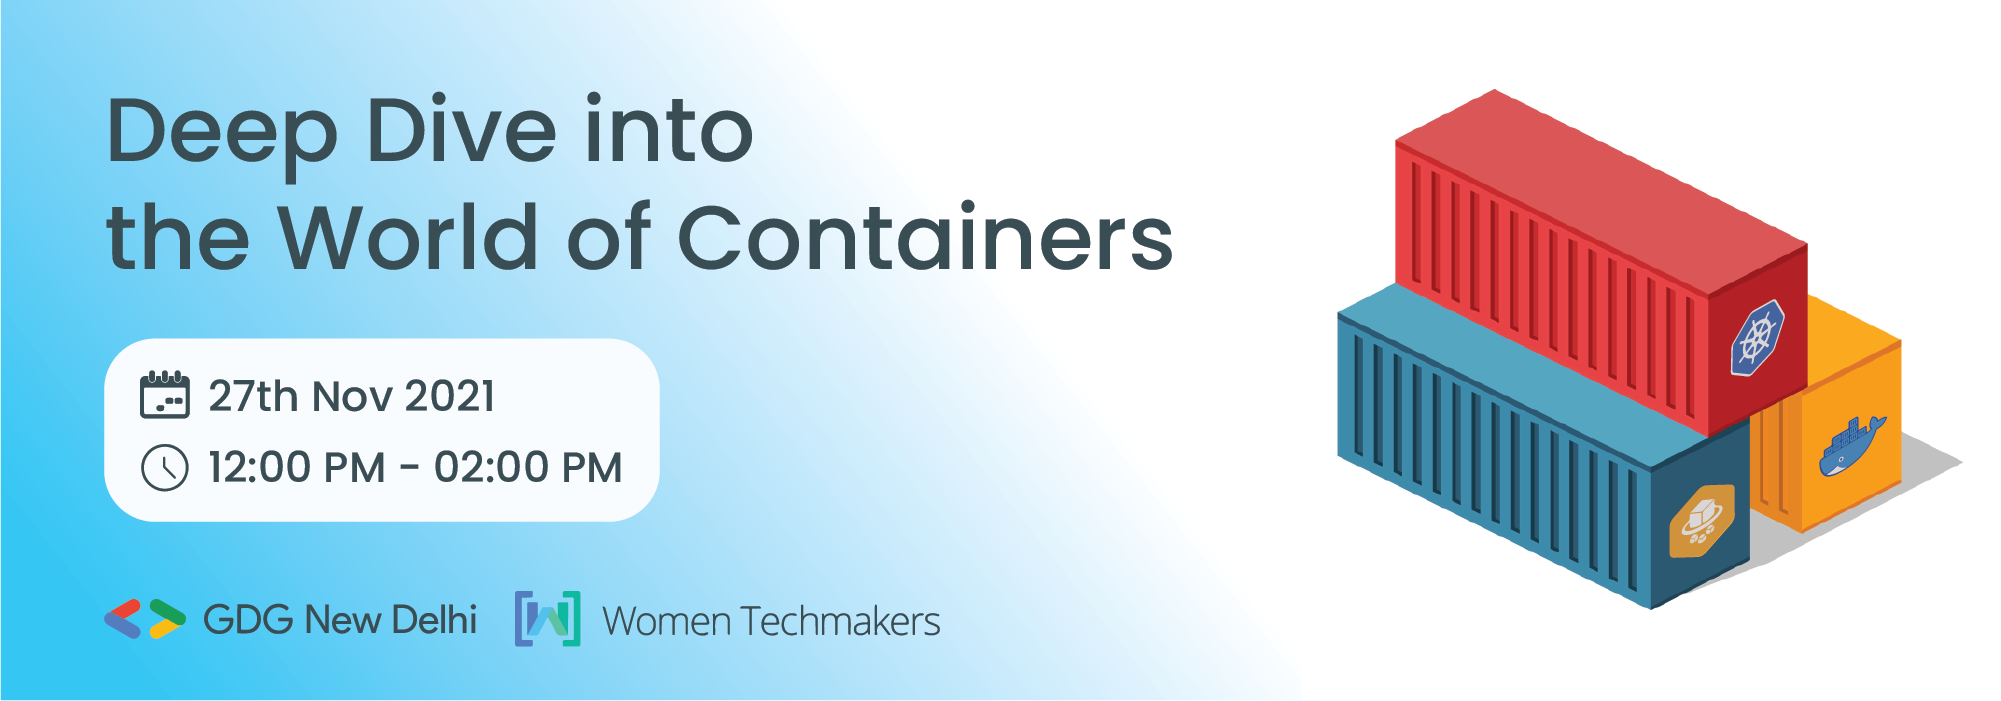 Deep Dive Into the World of Containers